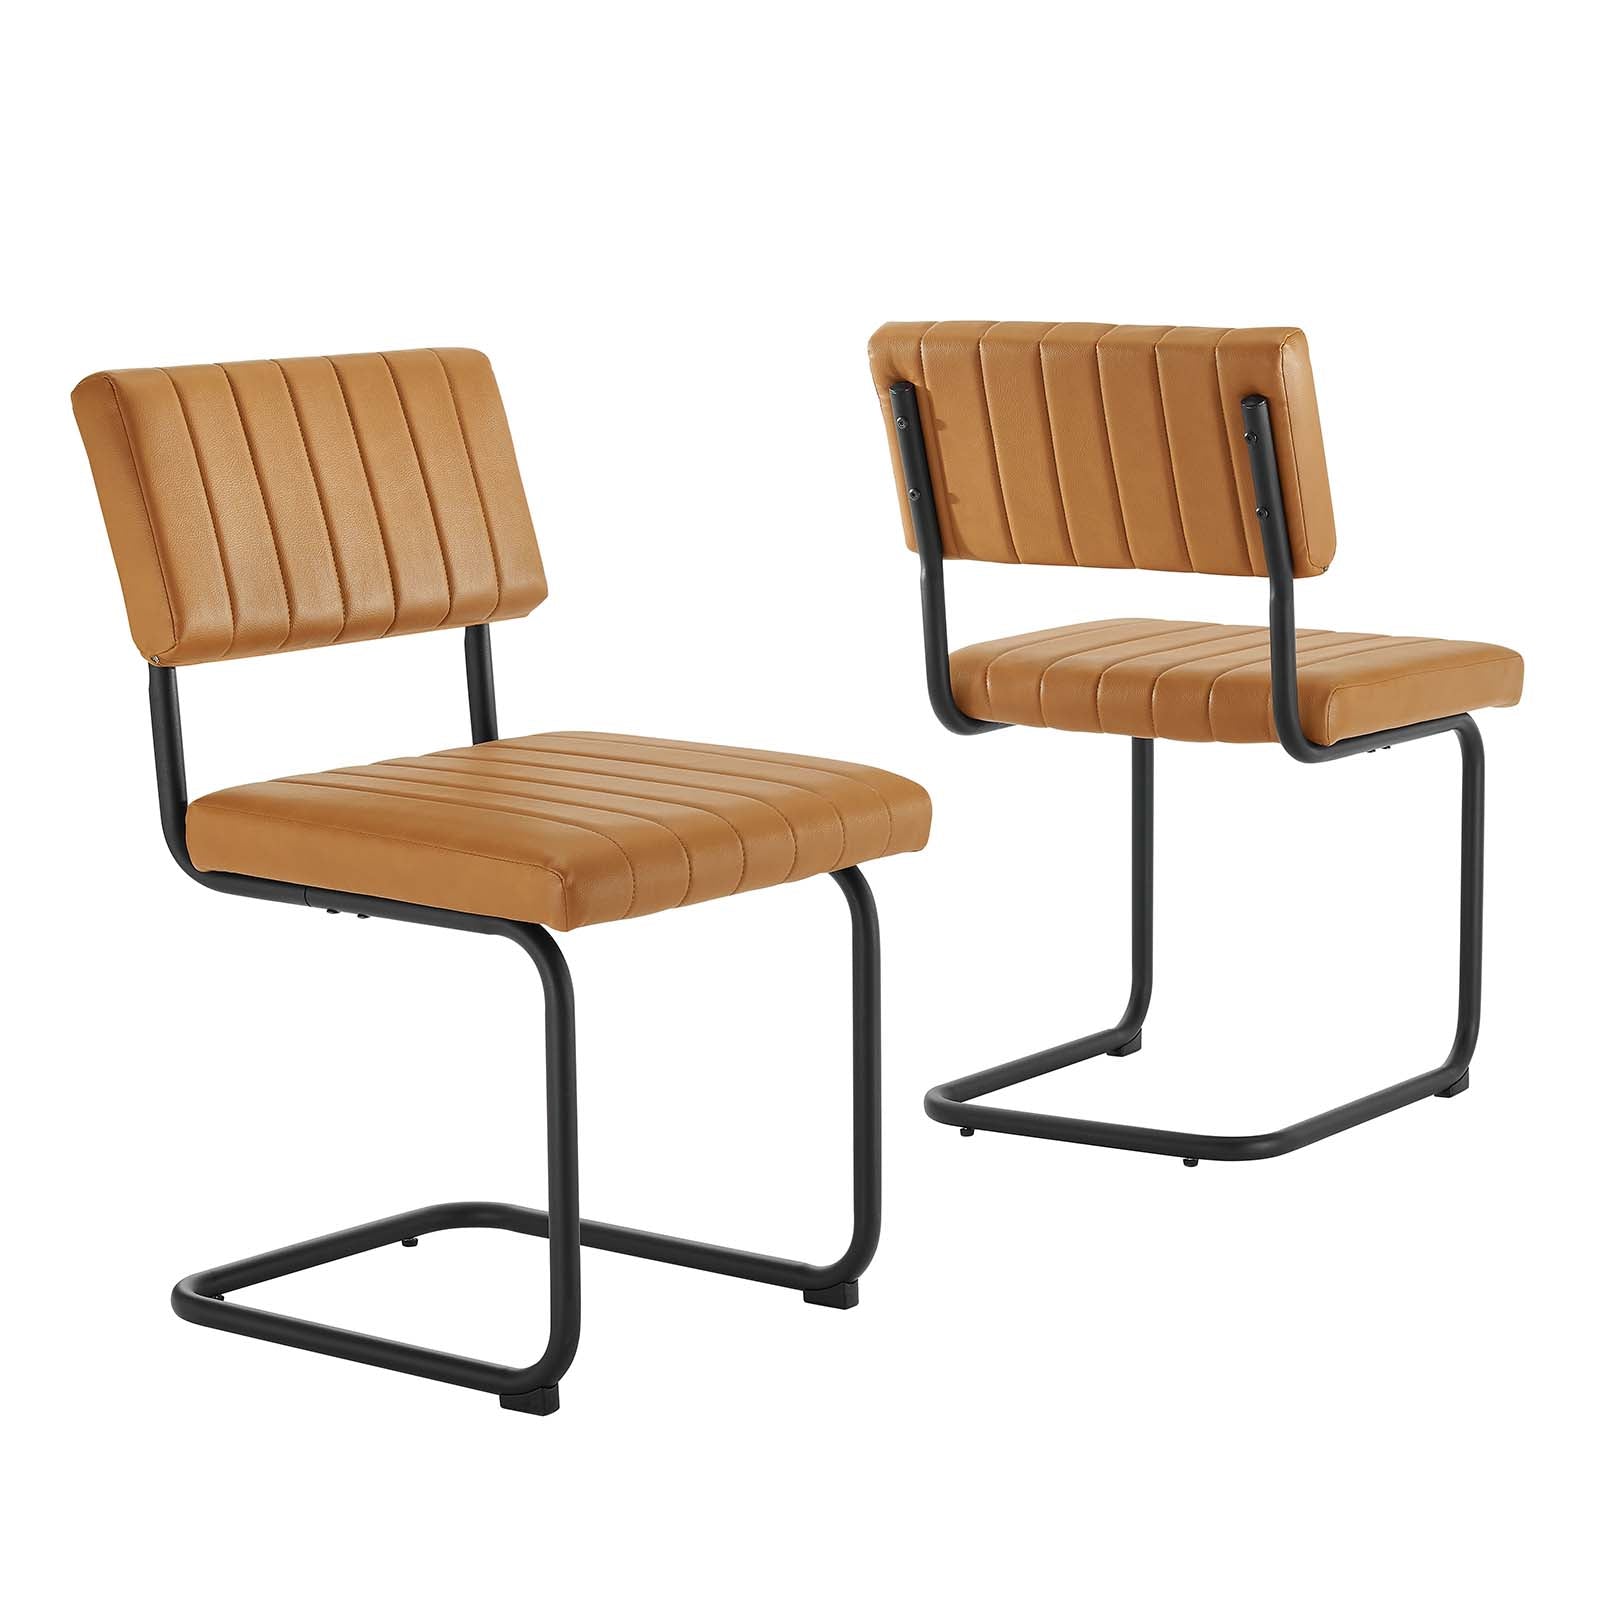 Parity Vegan Leather Dining Side Chairs - Set of 2 - East Shore Modern Home Furnishings